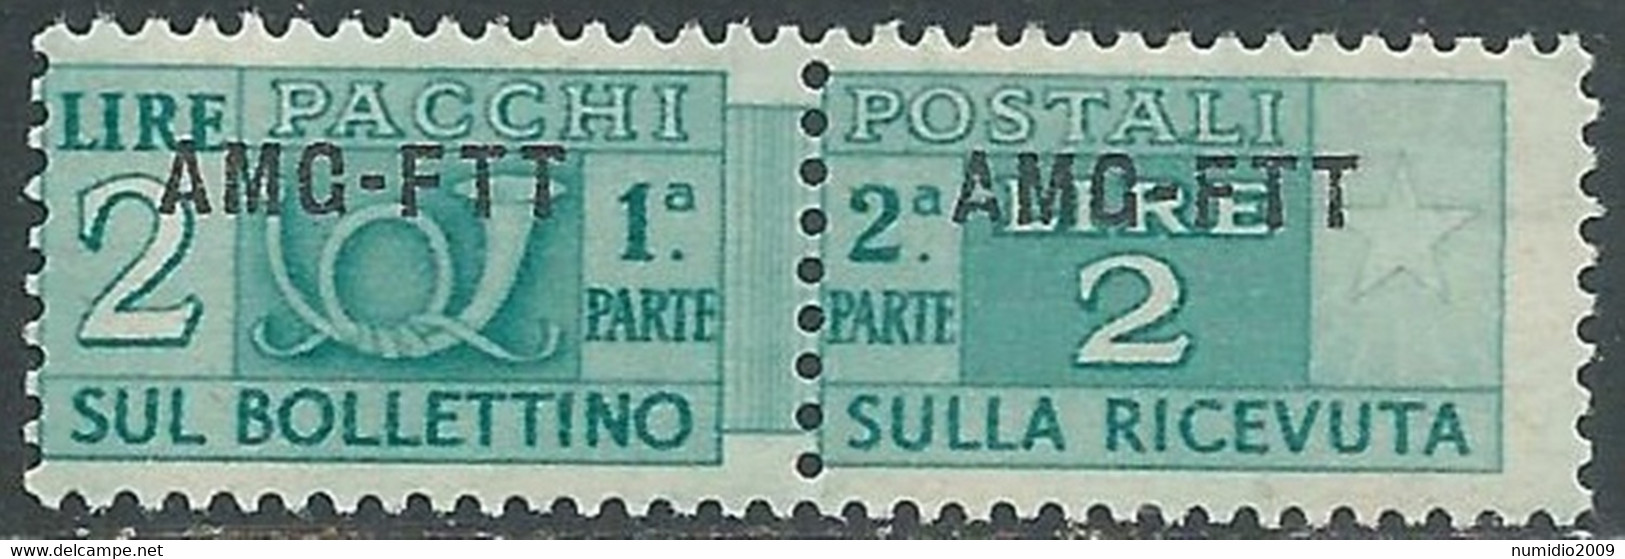 1949-53 TRIESTE A PACCHI POSTALI 2 LIRE MNH ** - RE24-6 - Postal And Consigned Parcels